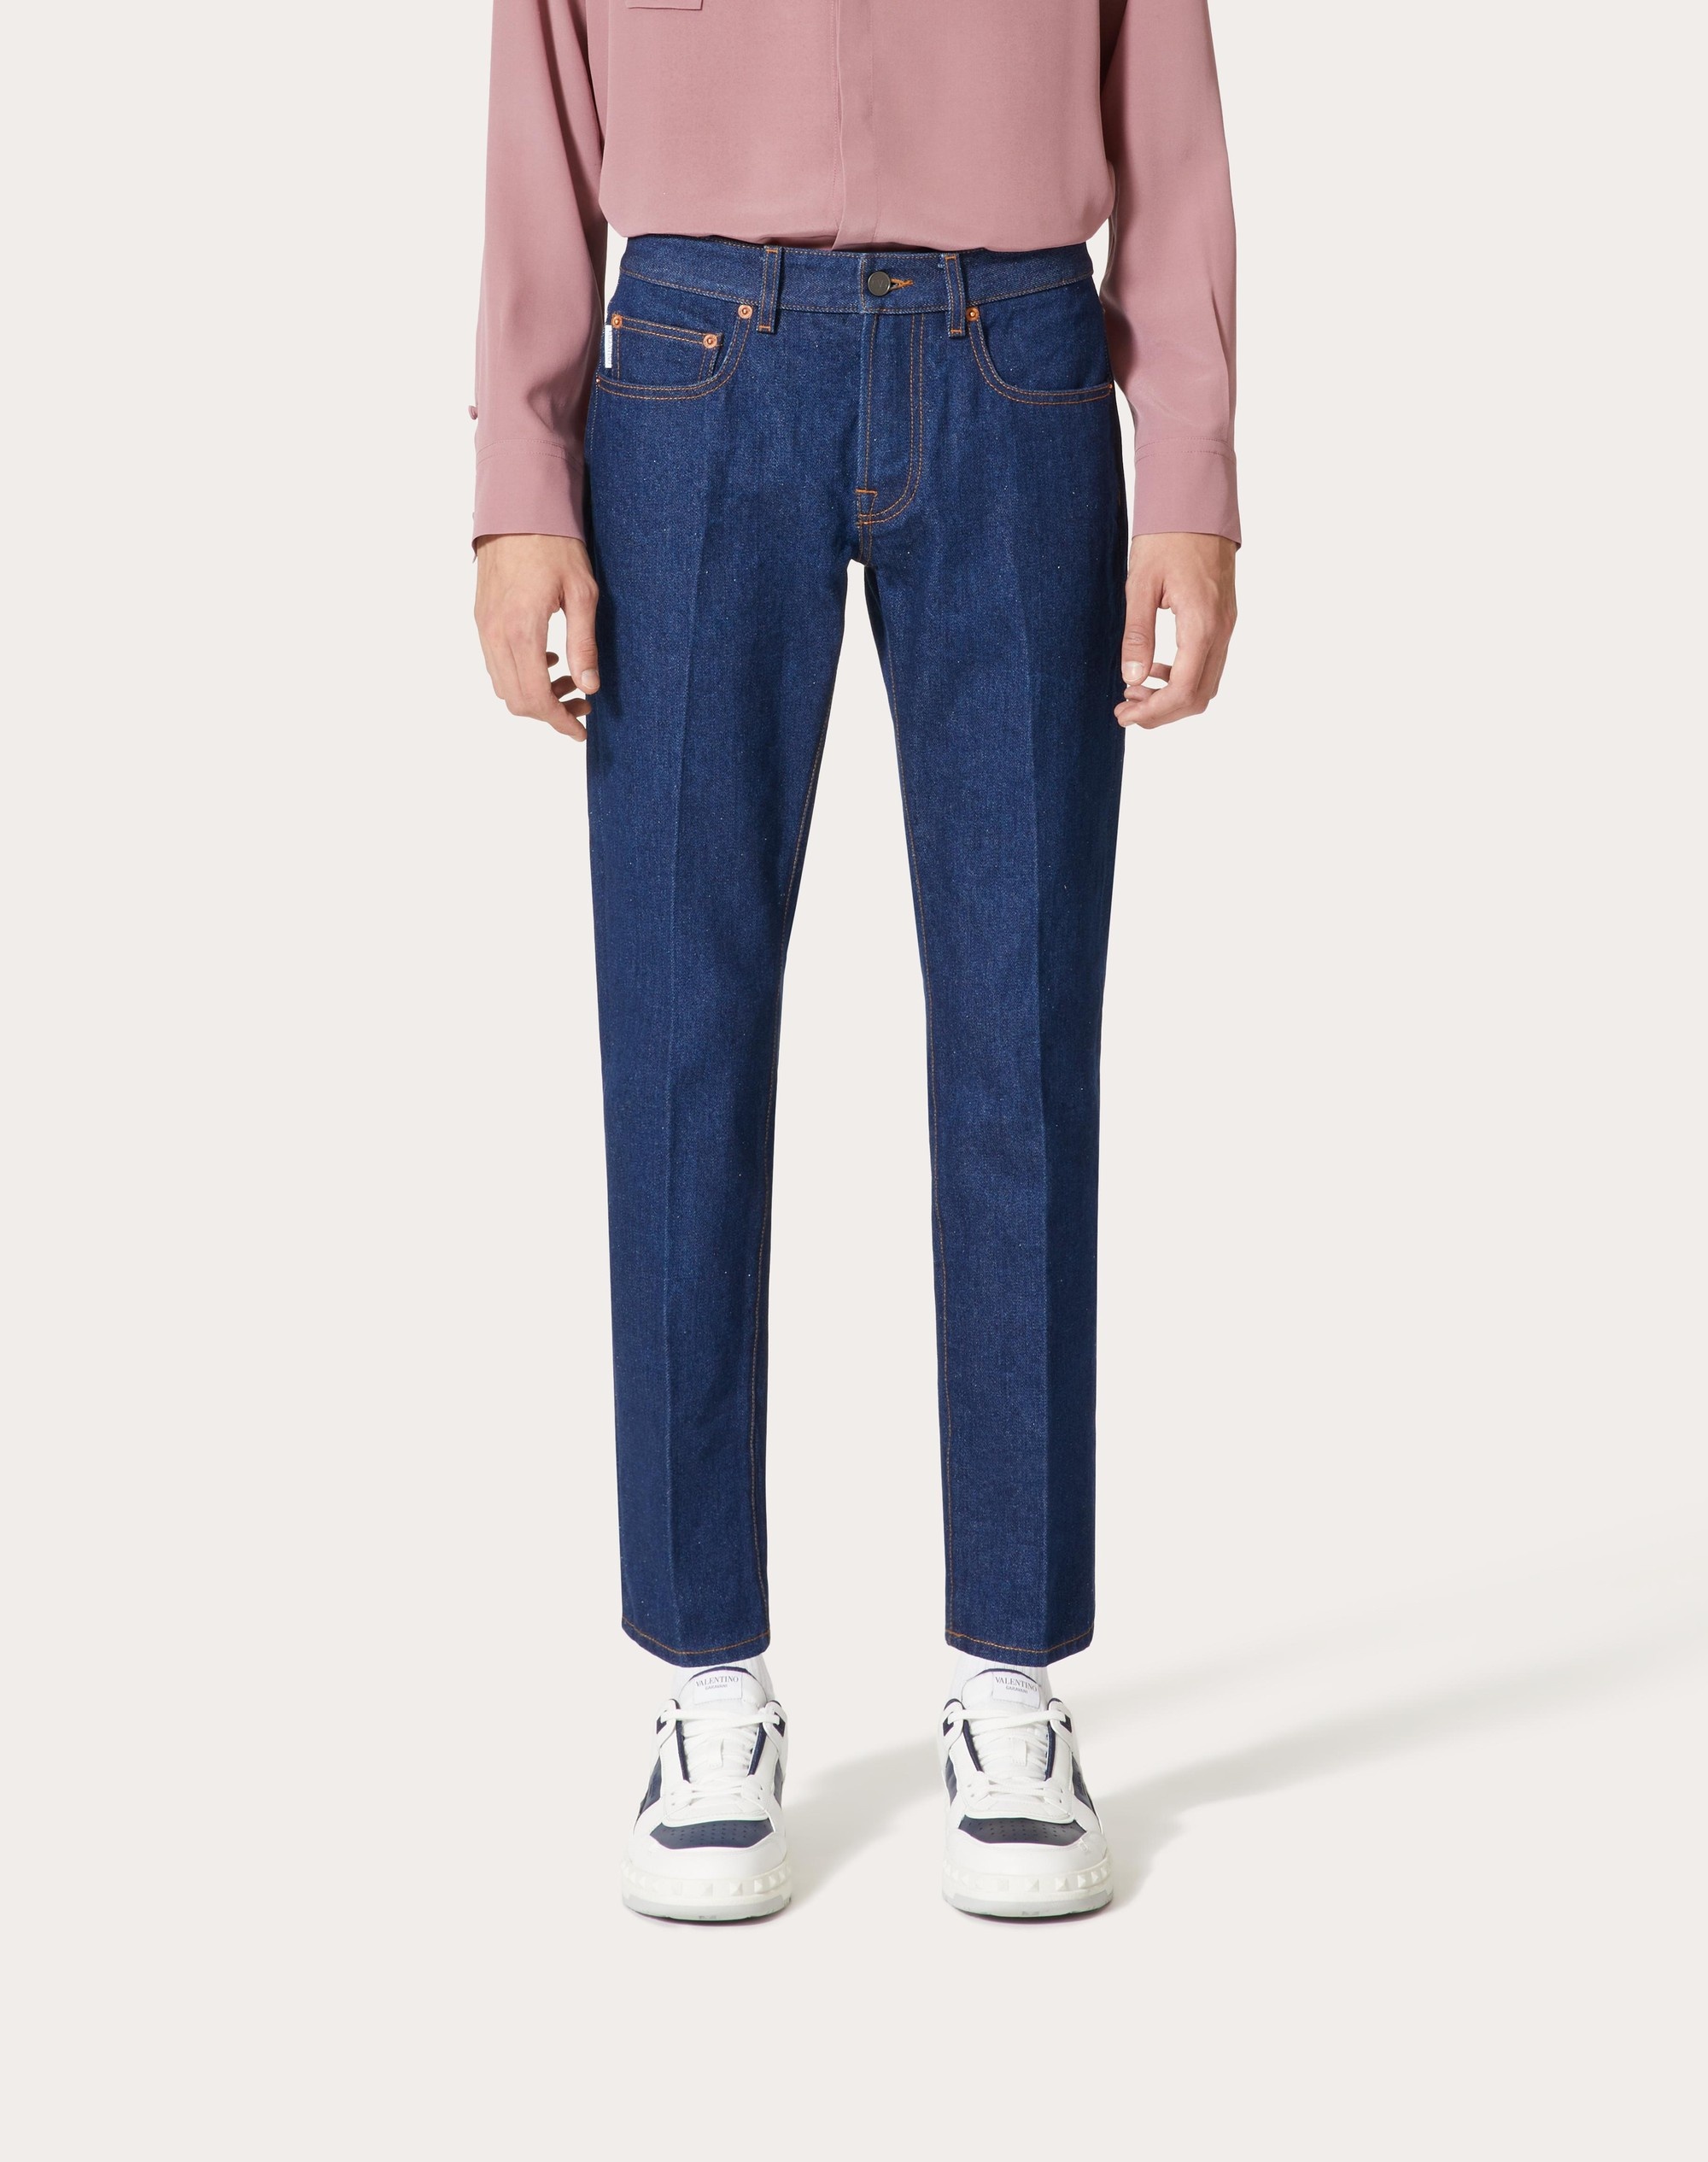 DENIM PANTS WITH MAISON VALENTINO TAILORING LABEL - 3